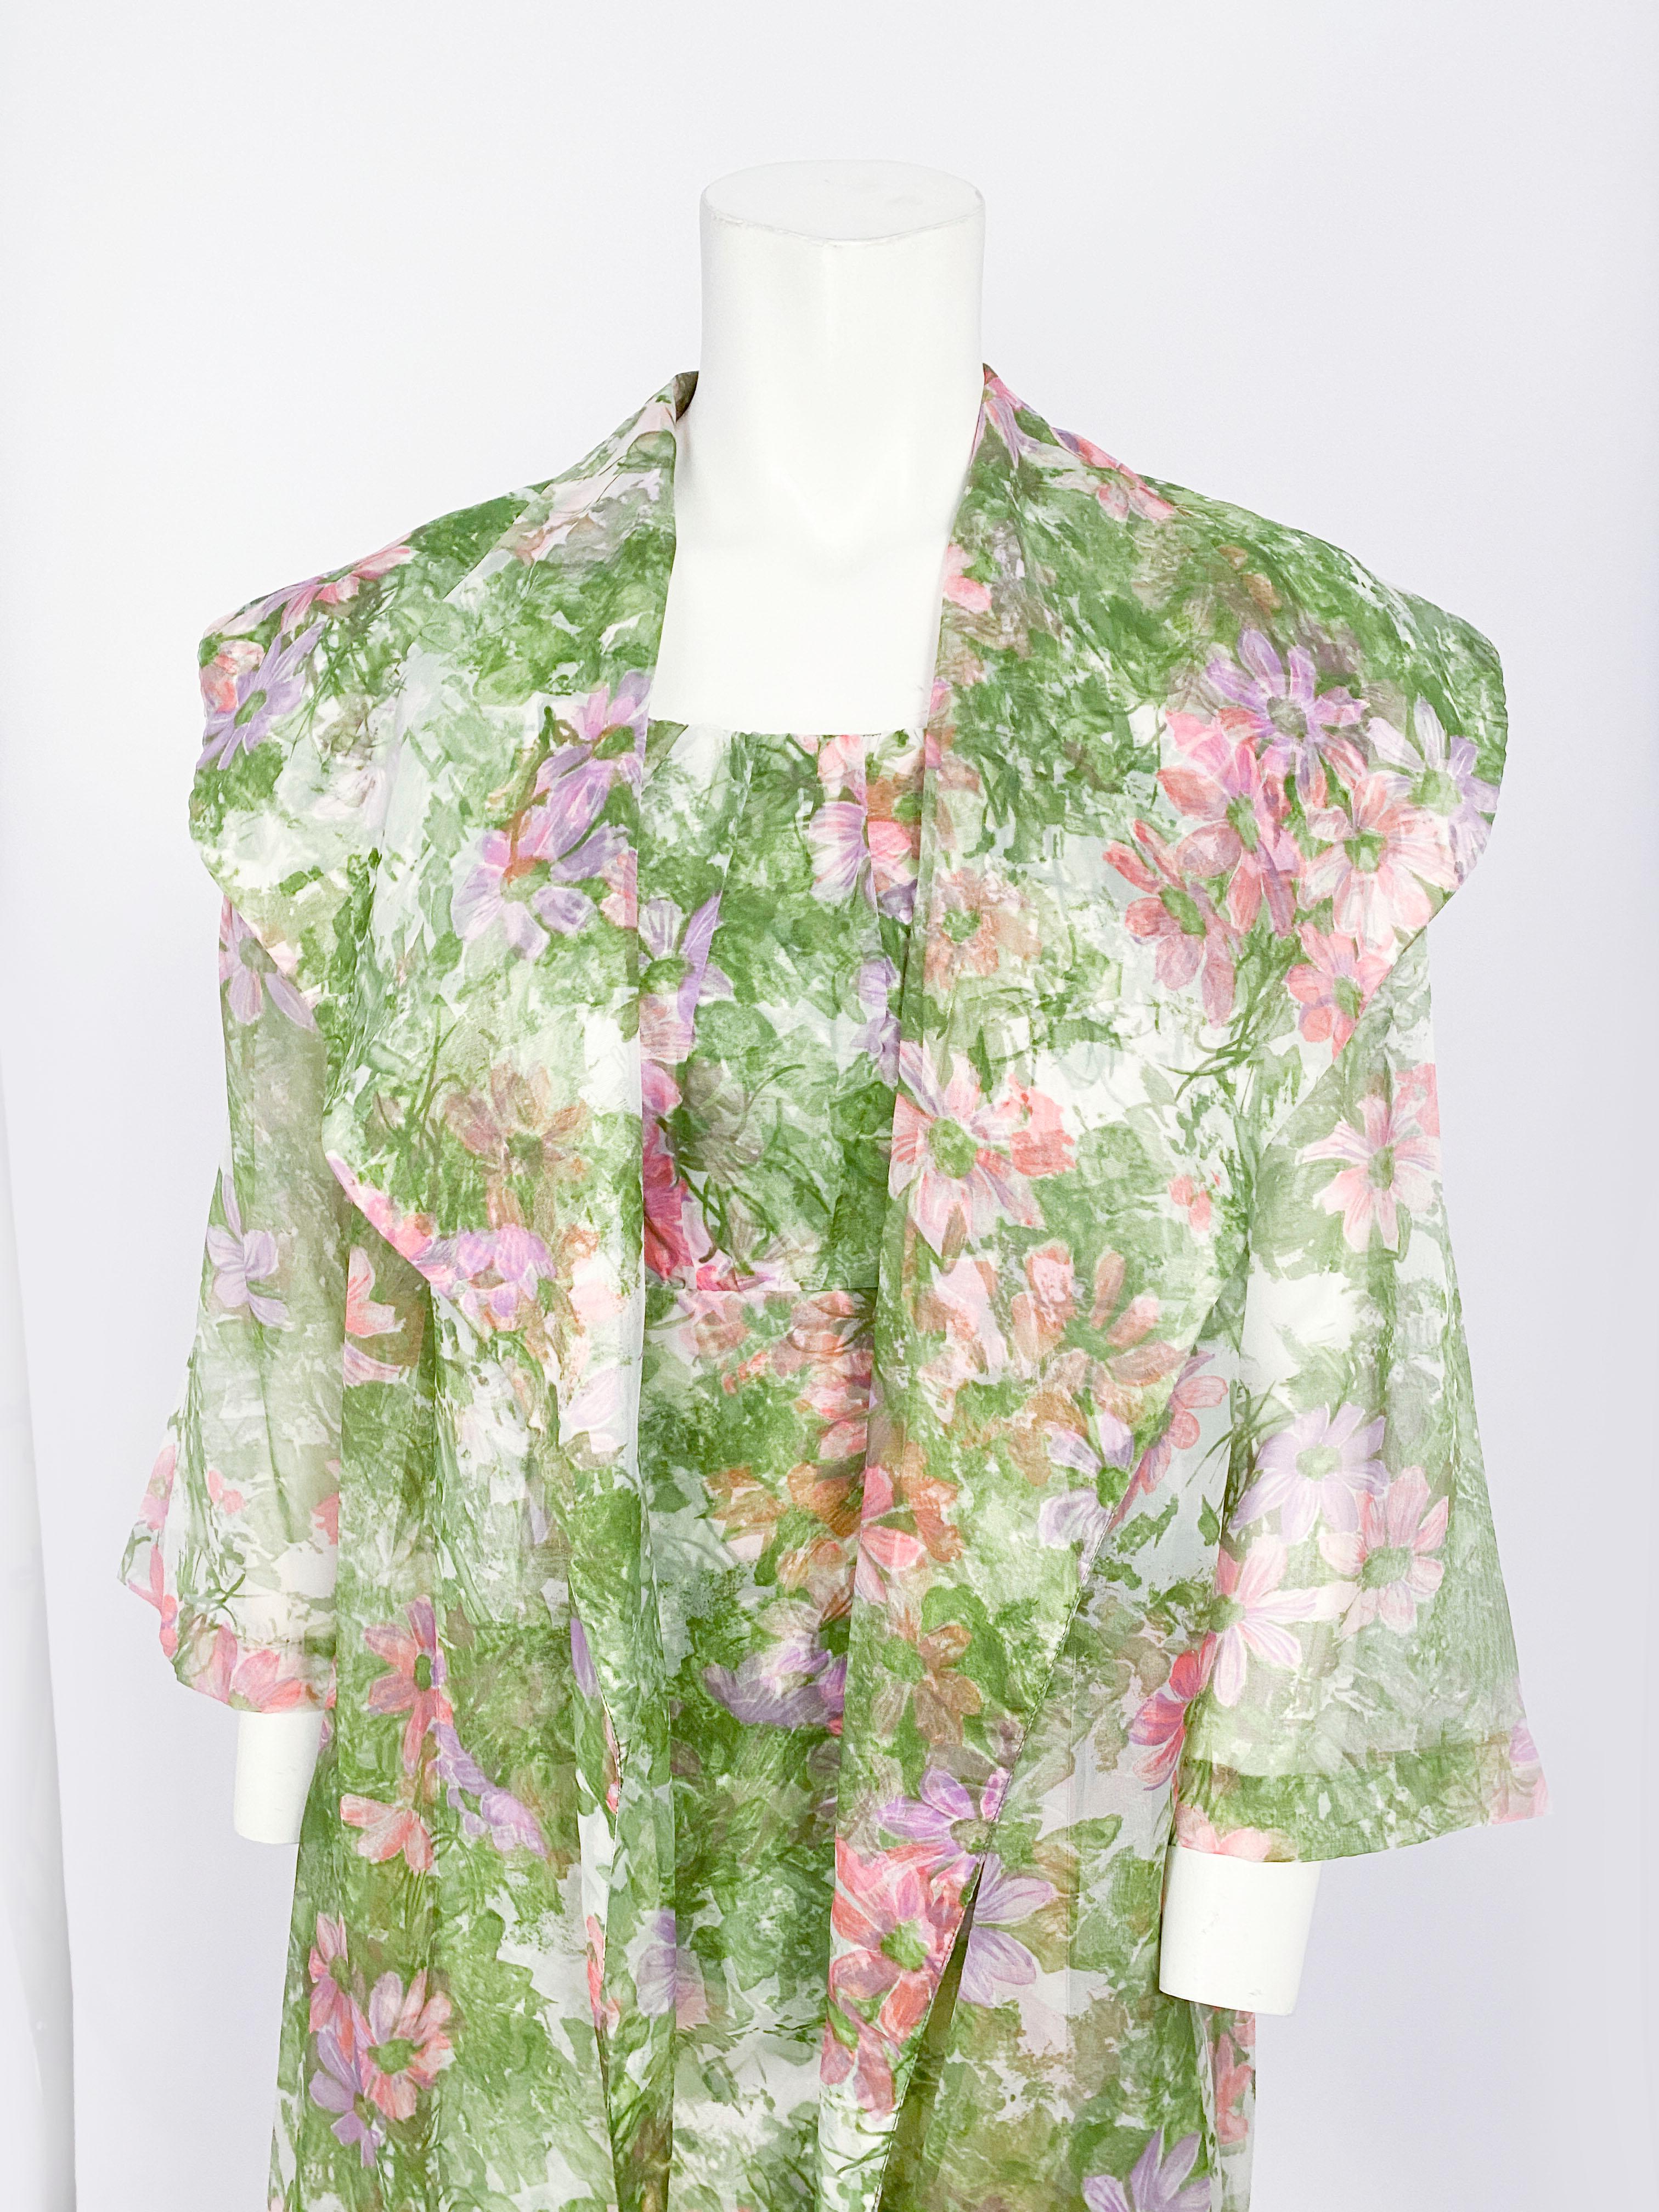 1960s floral printed polyester chiffon dress featuring green, pink and lavender tones. The sleeveless dress has a gathered neckline, an empire waist, a decorative bow, and is fully lined. The swing coat is light and sheer with 3/4 -length sleeves